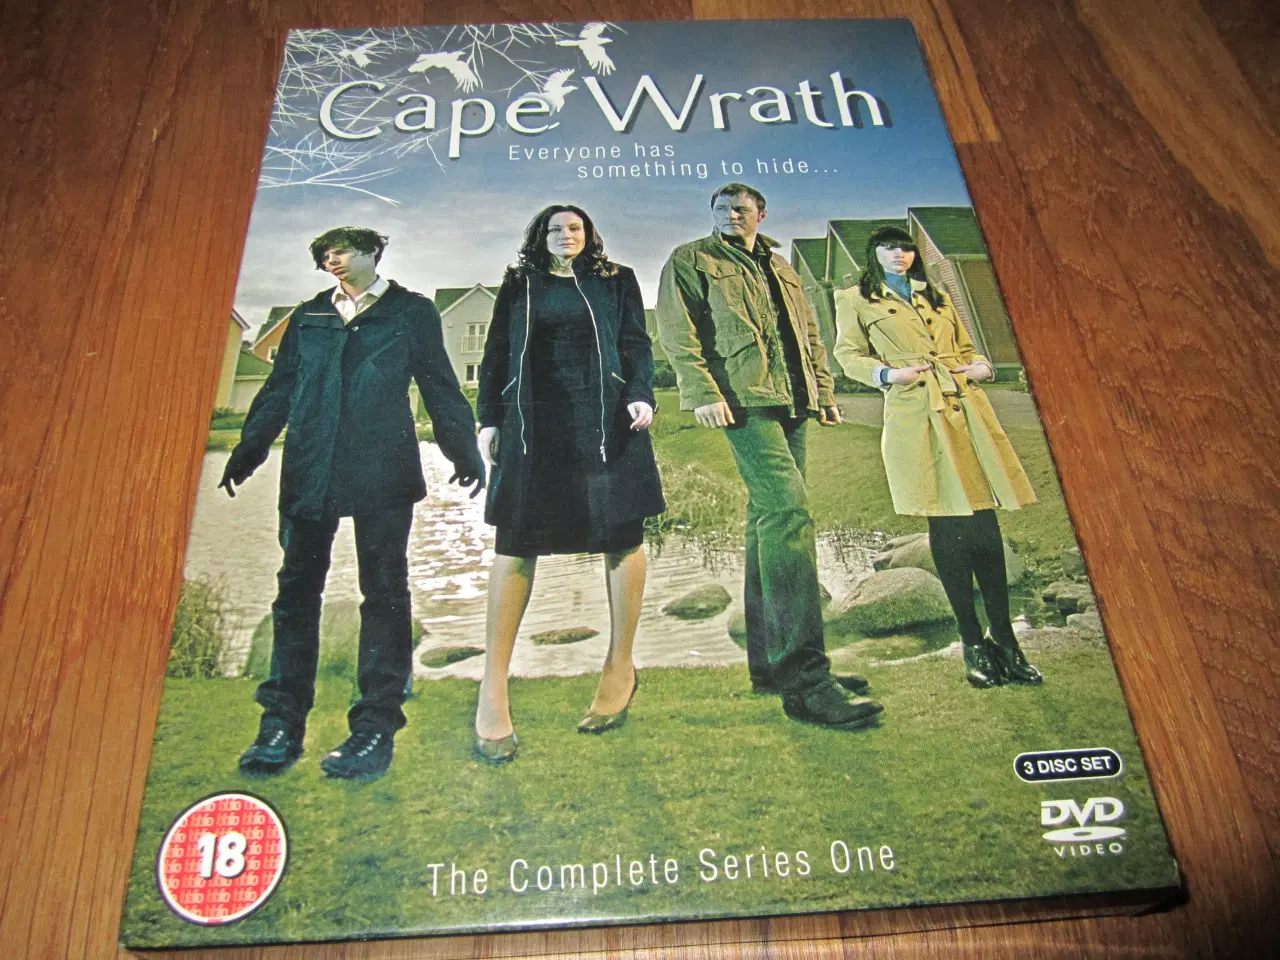 Billede 1 - CAPE WRATH. The Complete Series One.